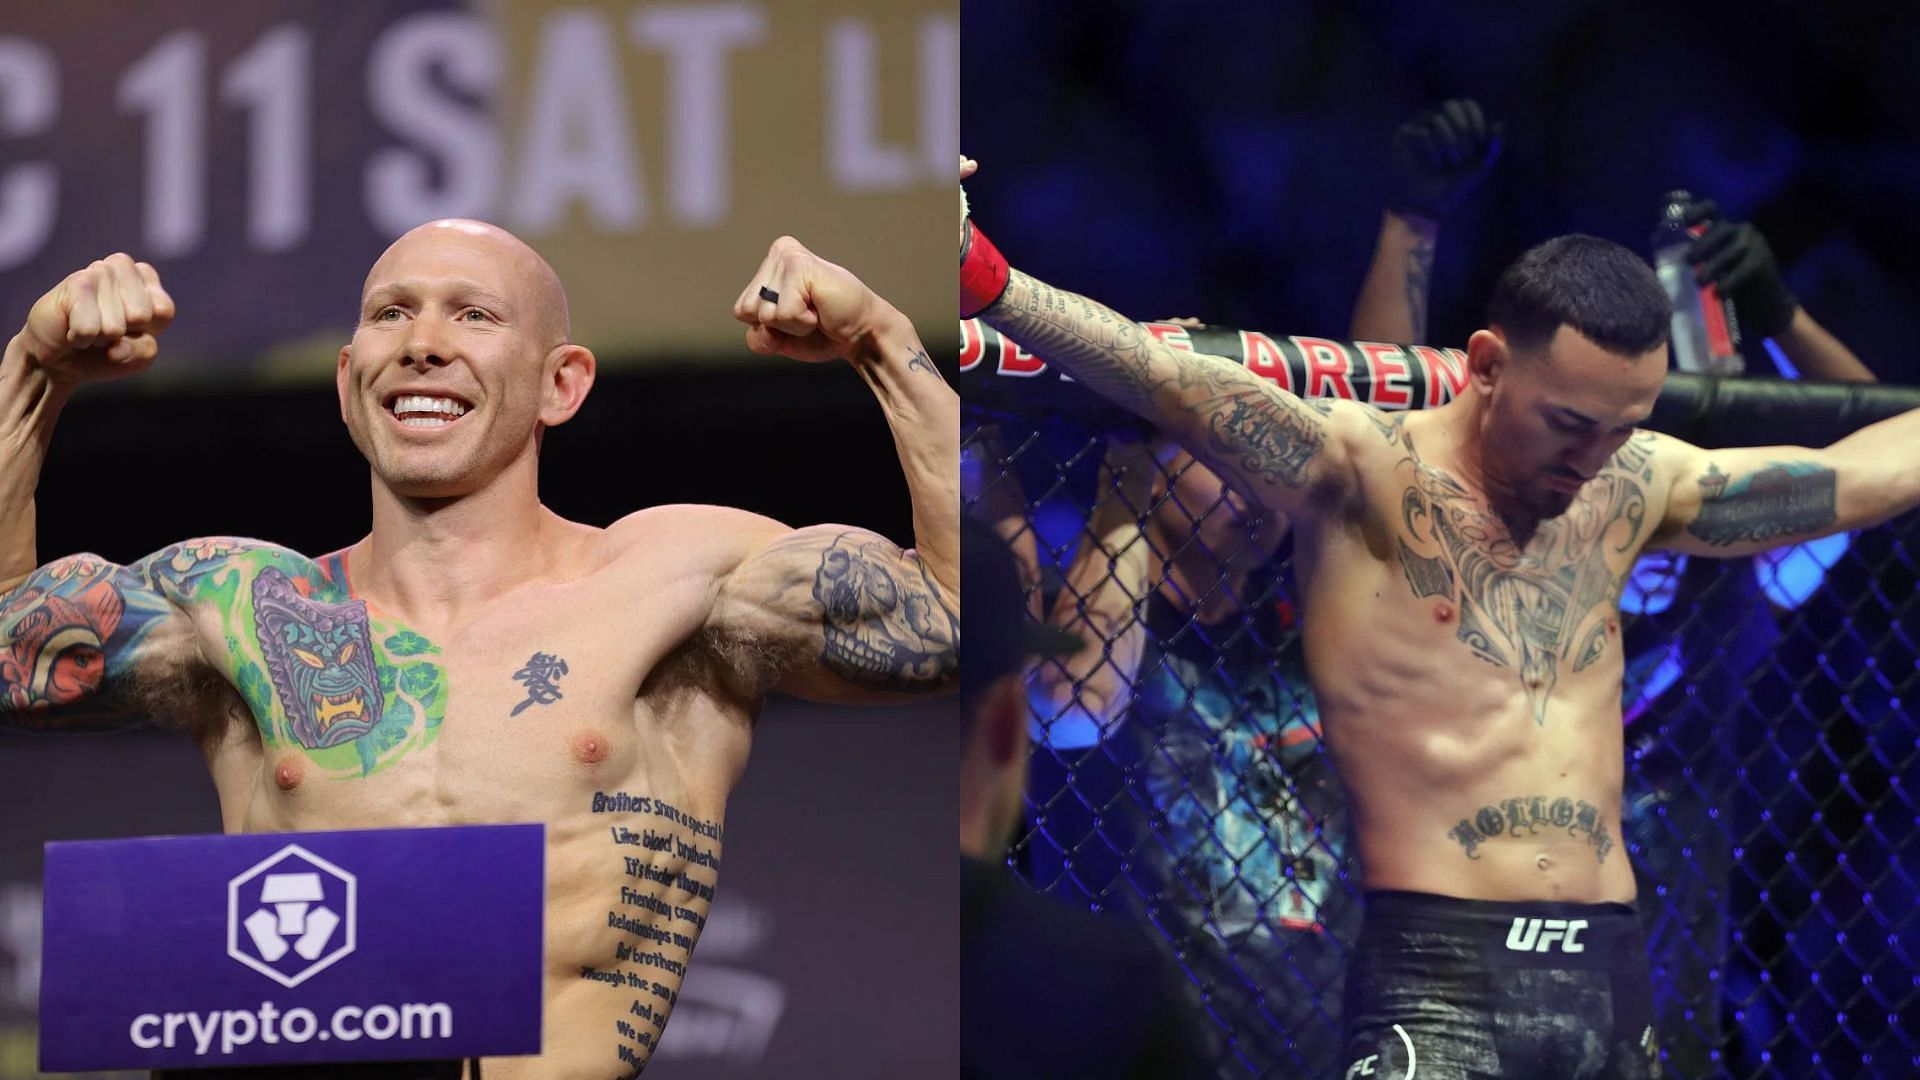 Josh Emmett (left) and Max Holloway (right) [Images courtesy of Getty]